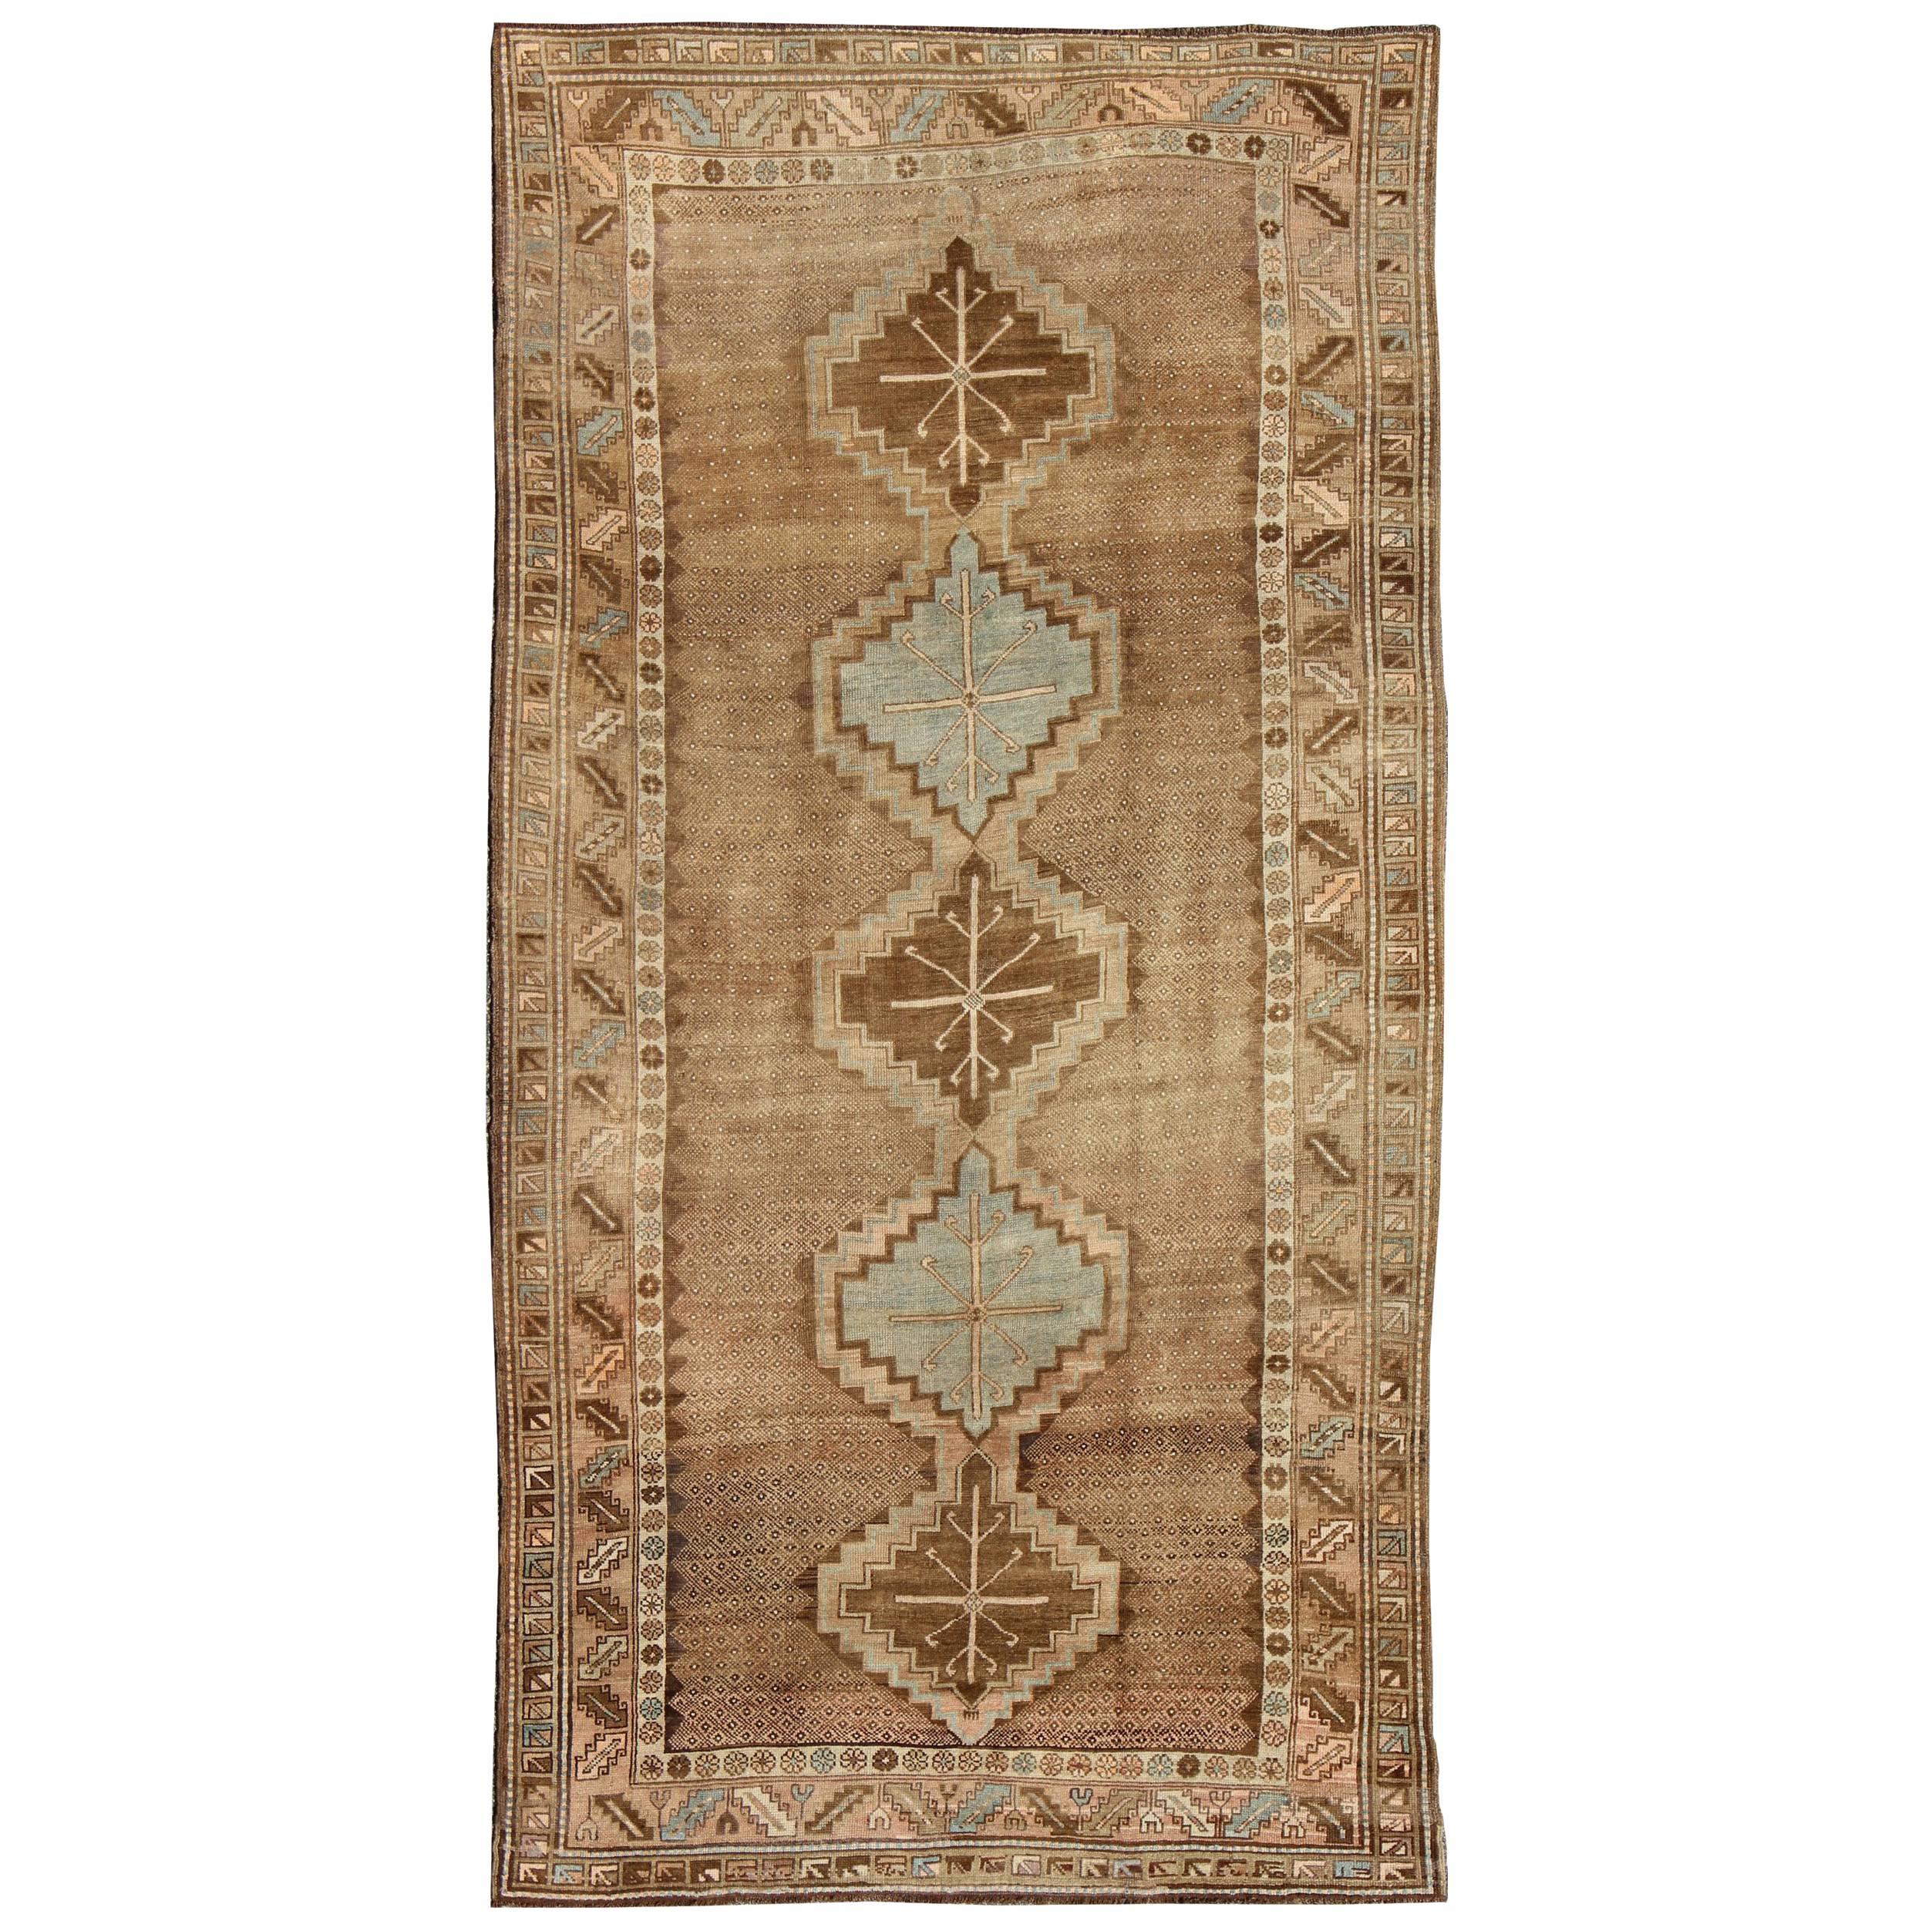 Tribal Turkish Oushak Gallery Rug in Camel with Central Design